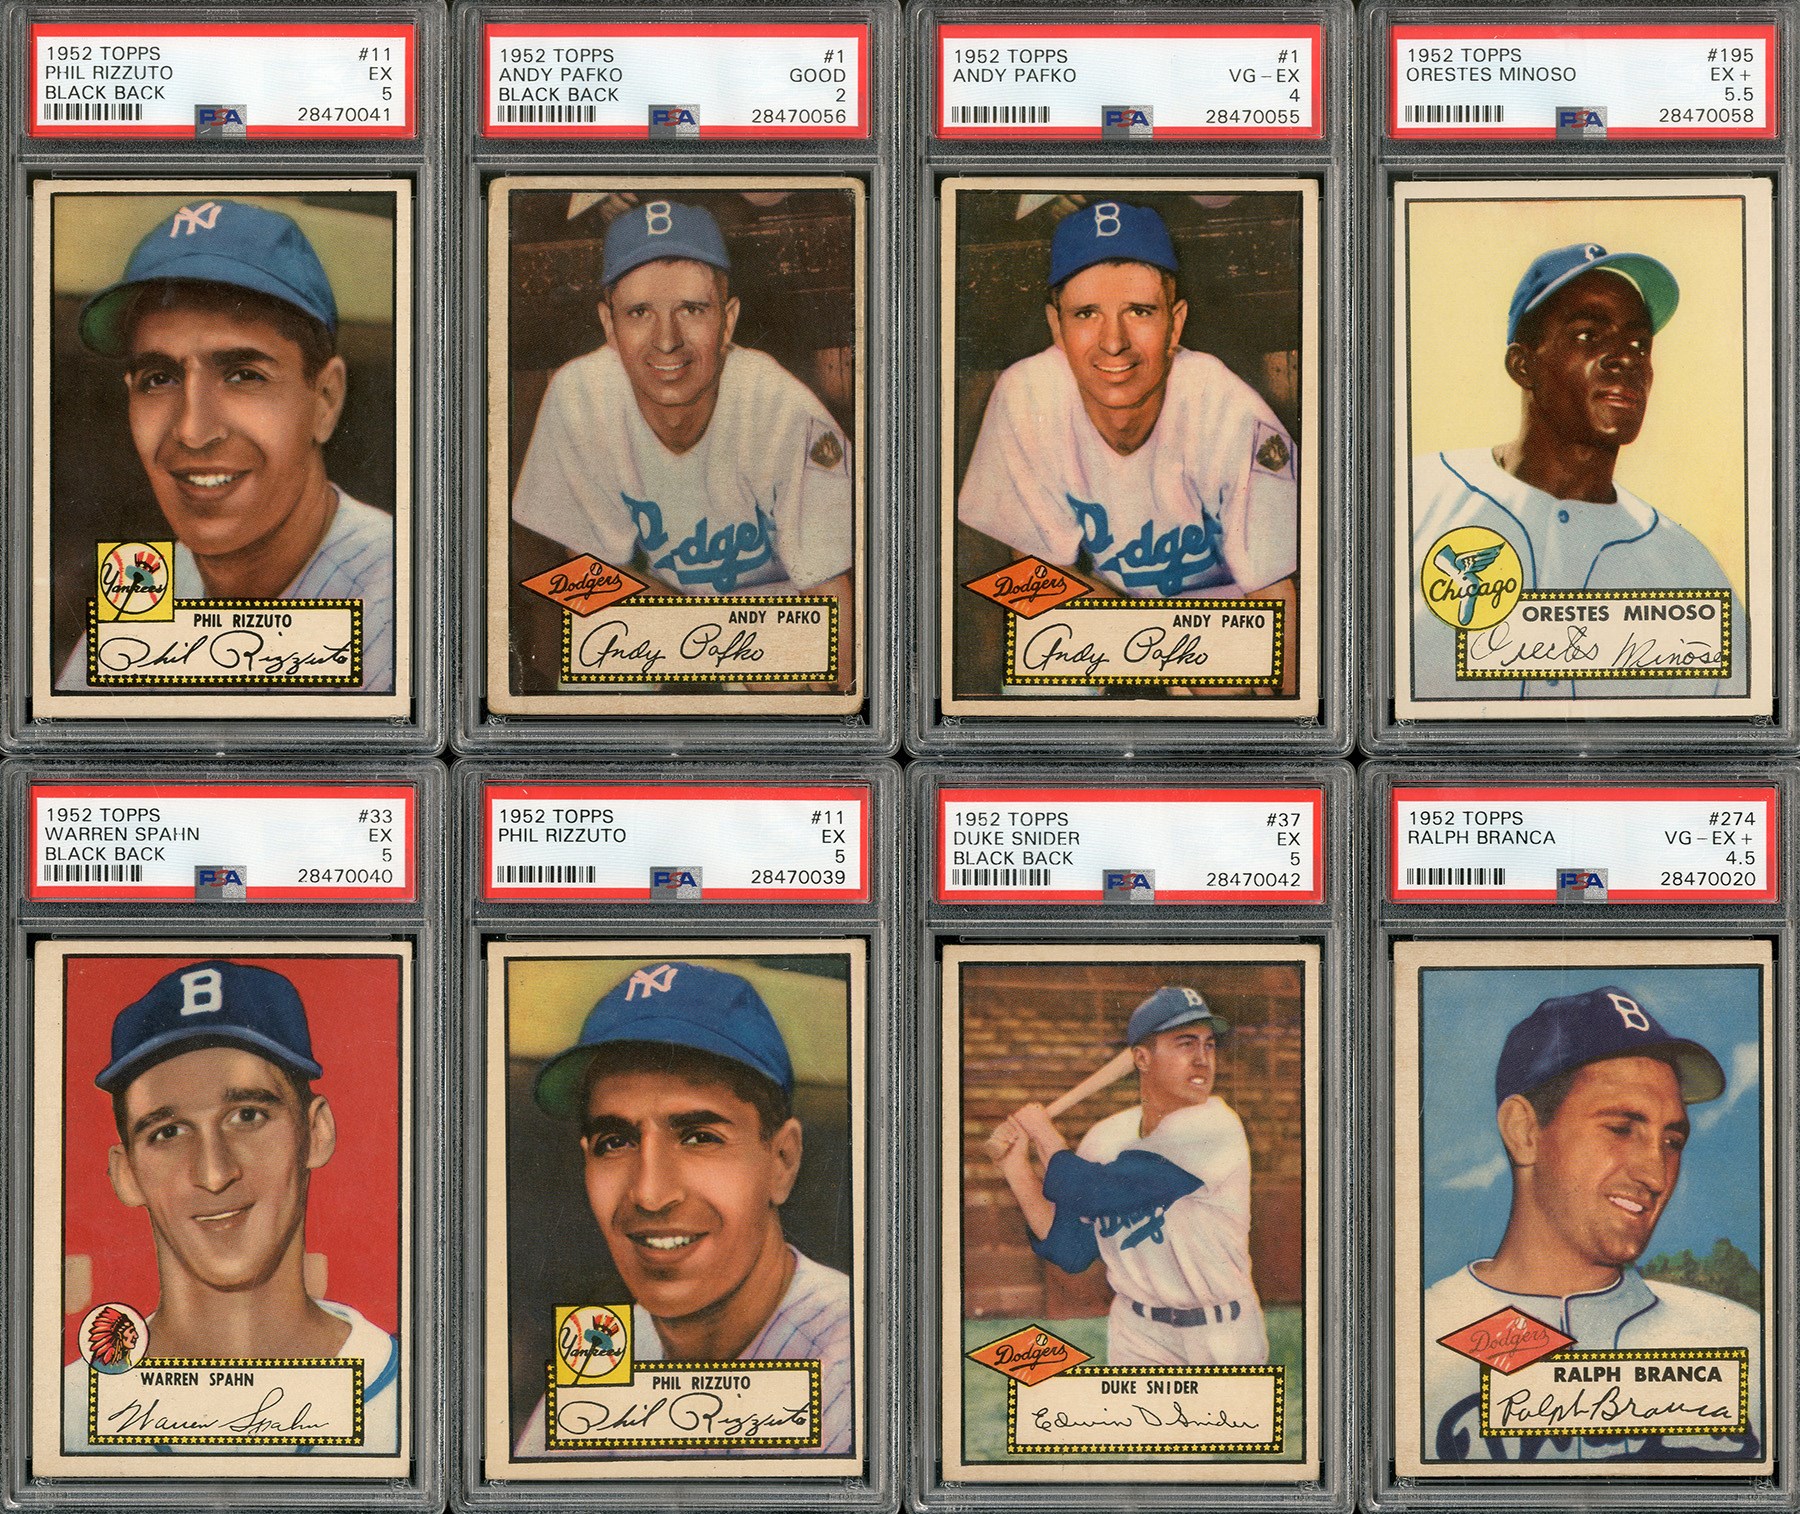 Baseball and Trading Cards - 1952 Topps Lot (370) with HOFers and 9 High Numbers (27-PSA Graded)